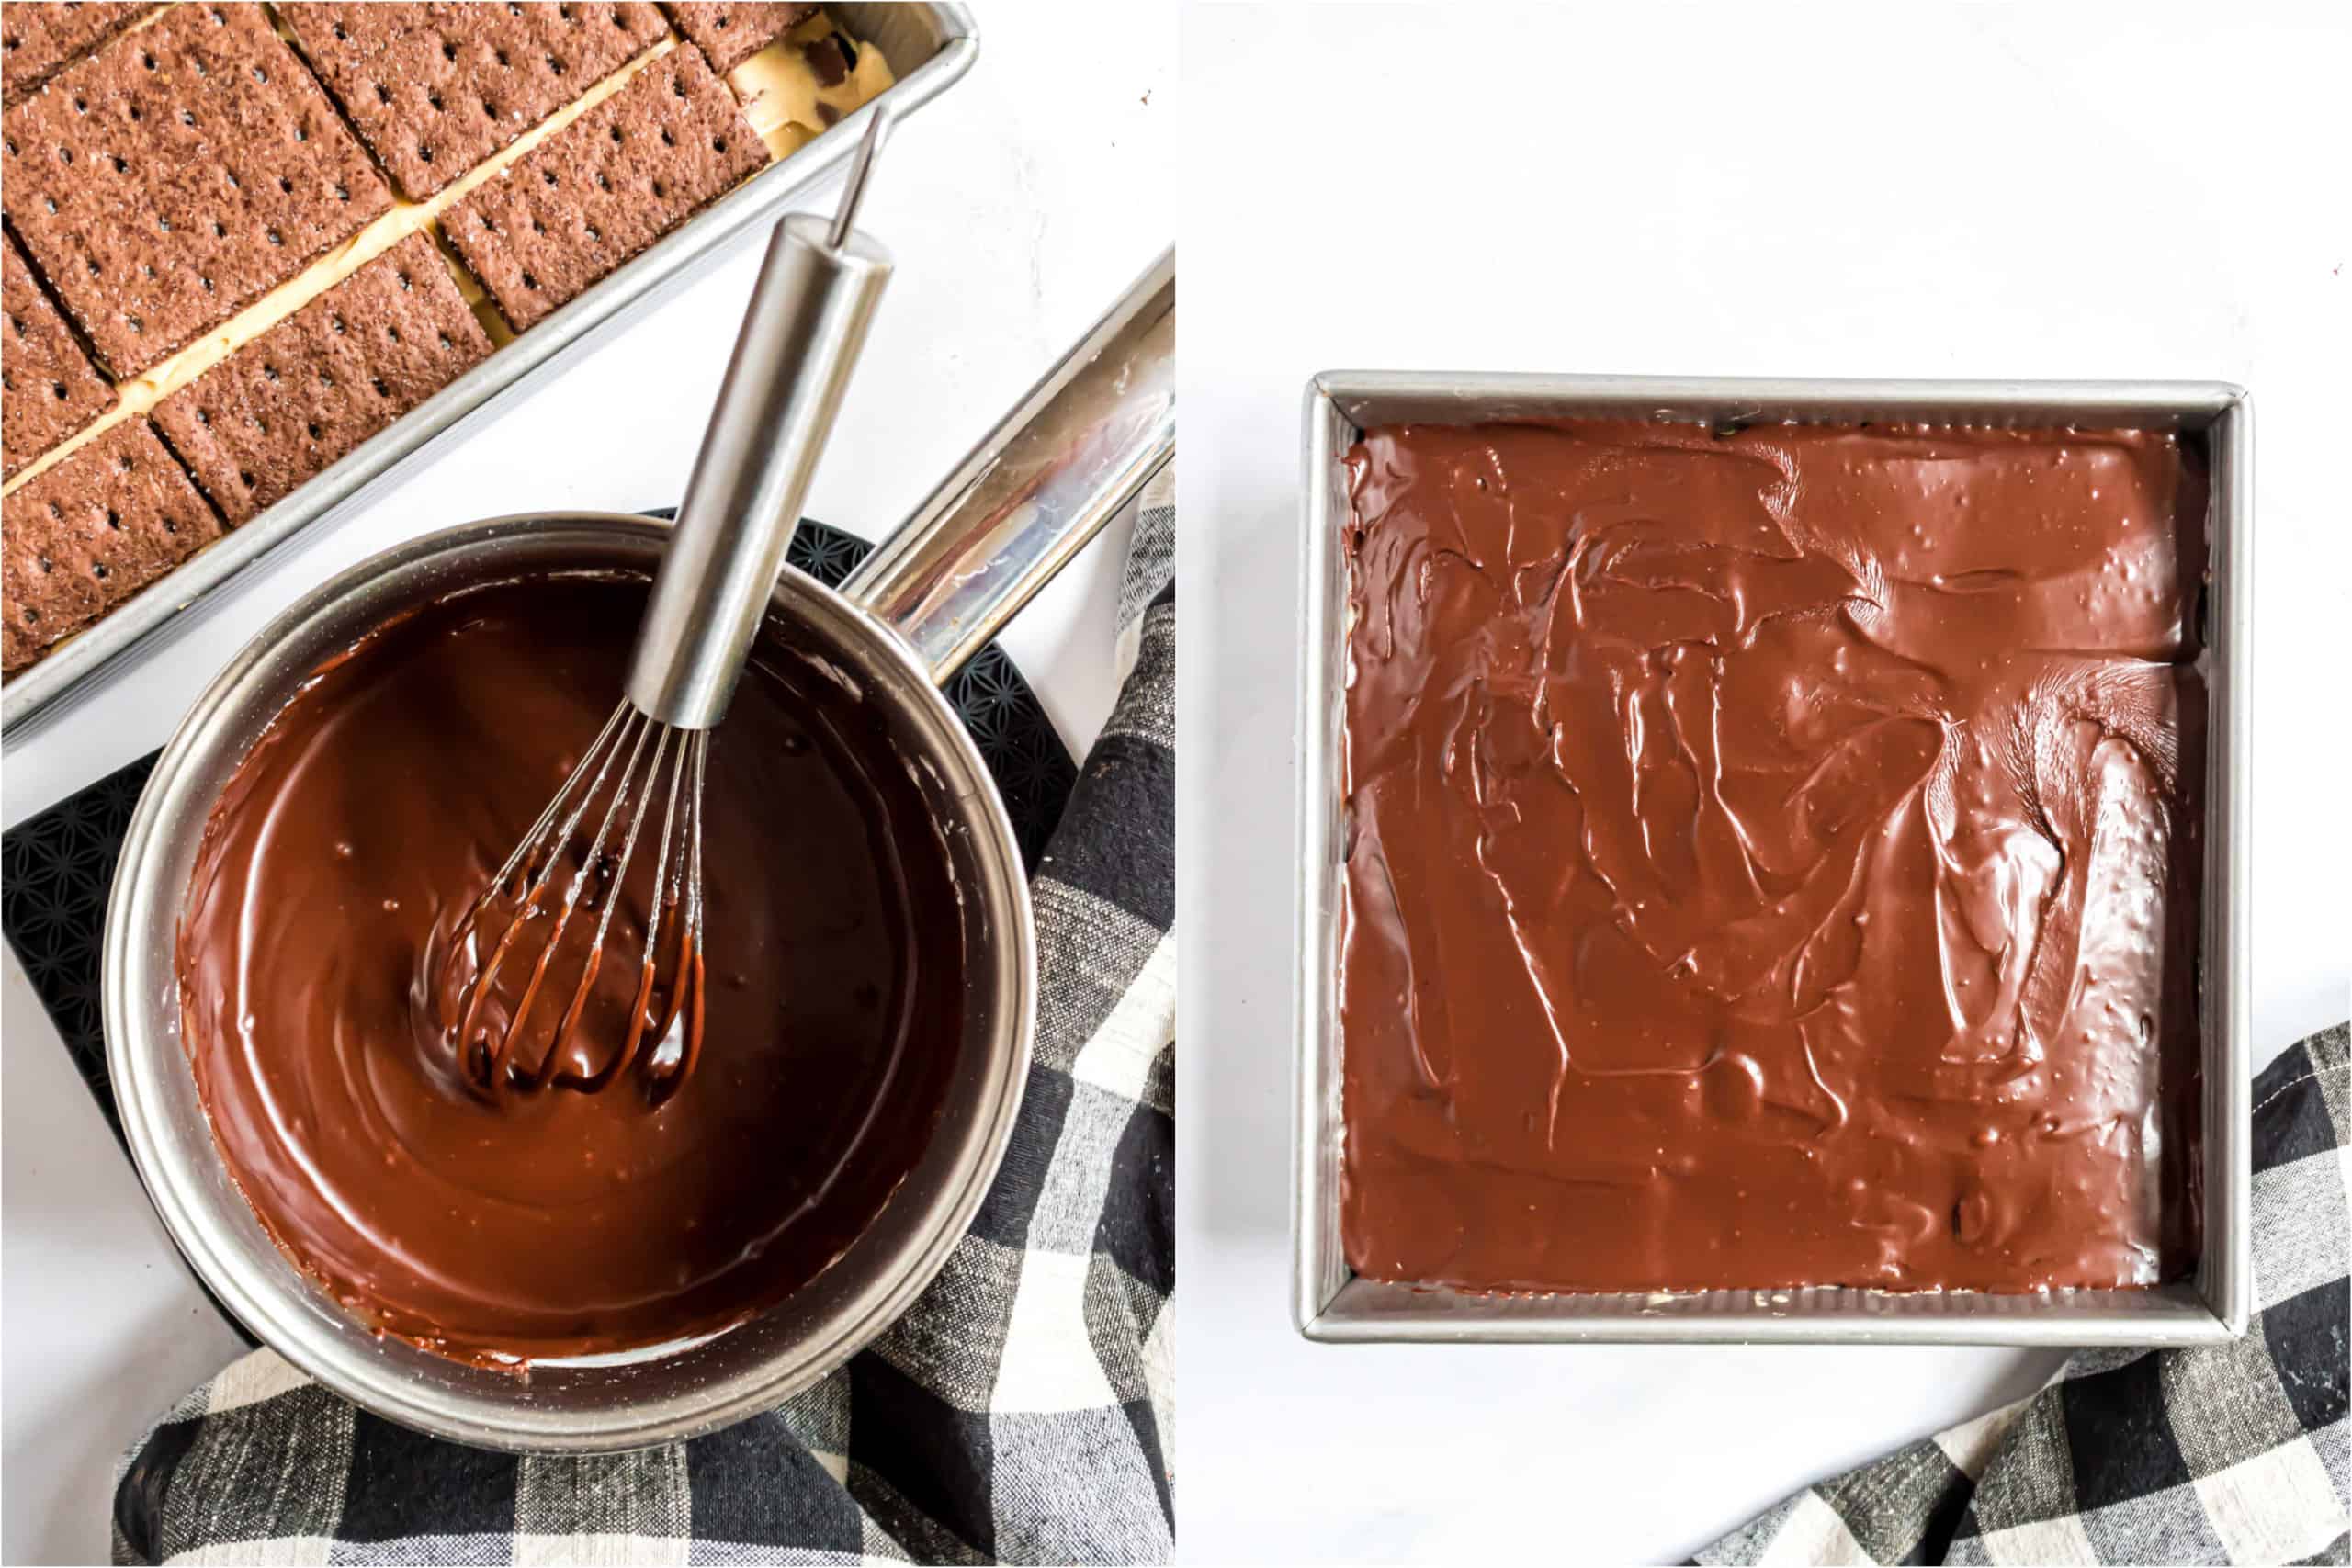 Step by step photos showing how to make chocolate frosting for eclair cake.